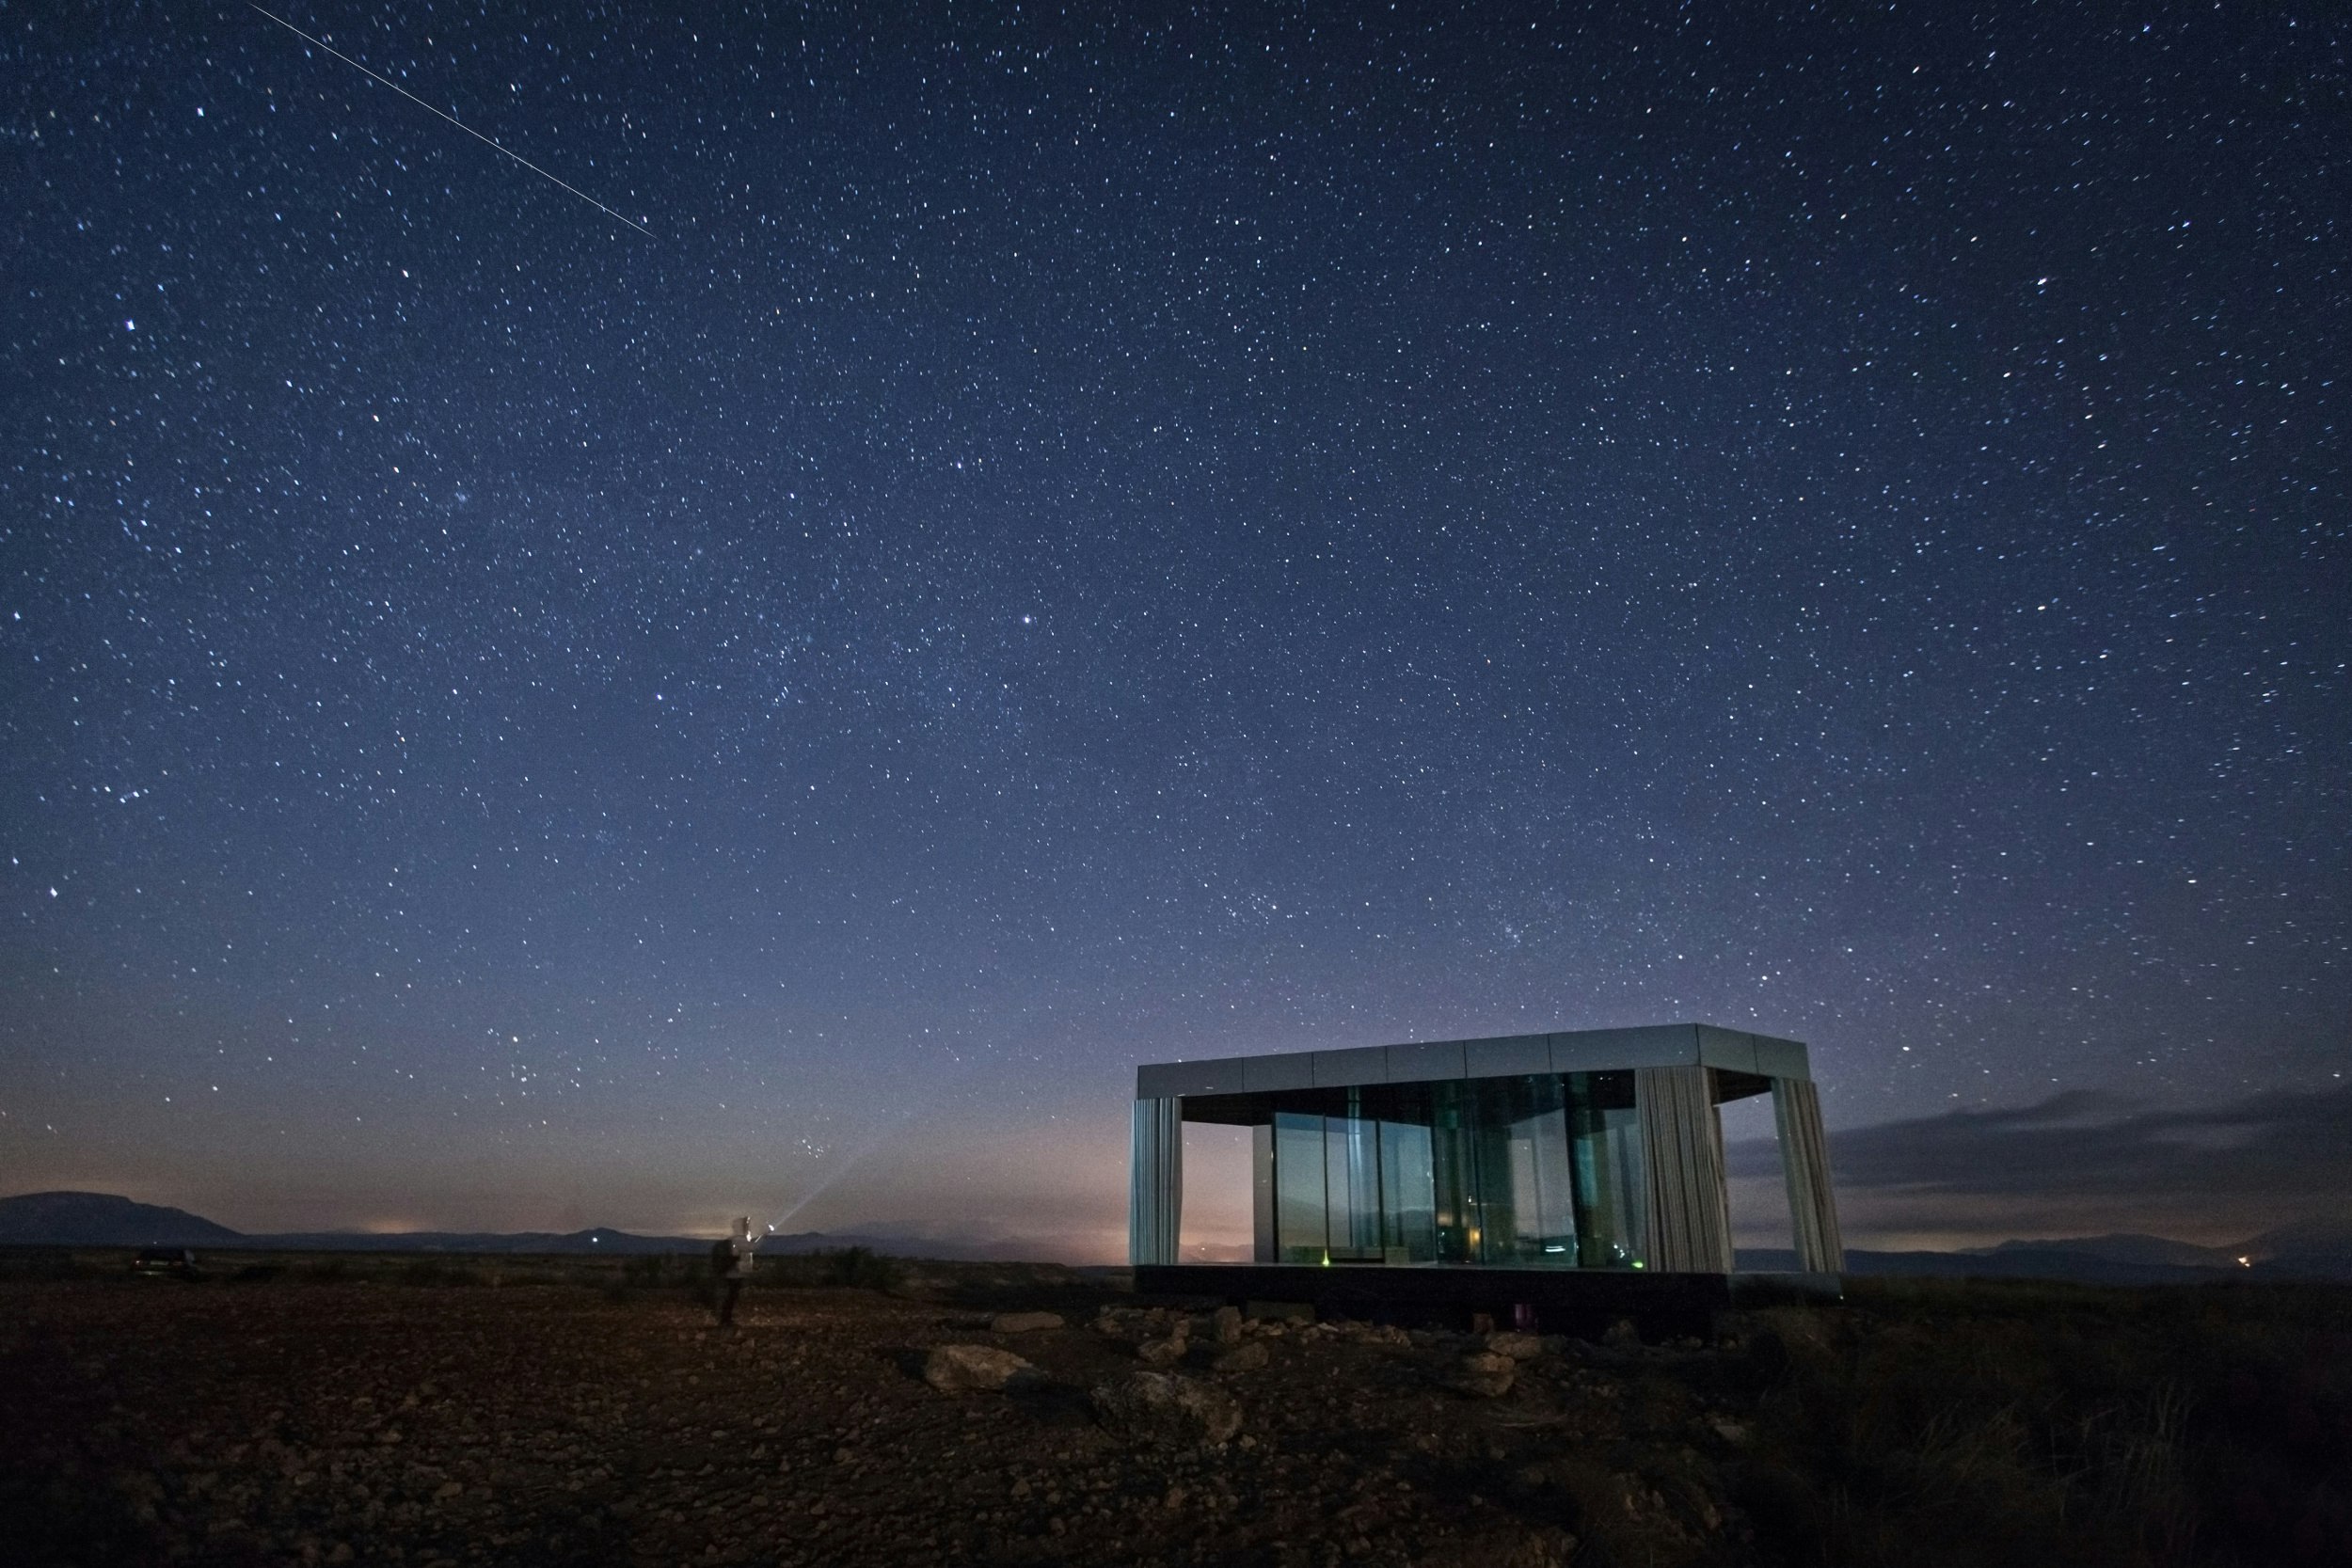 Visitors can gaze up at the stars from the bedroom in the small house.